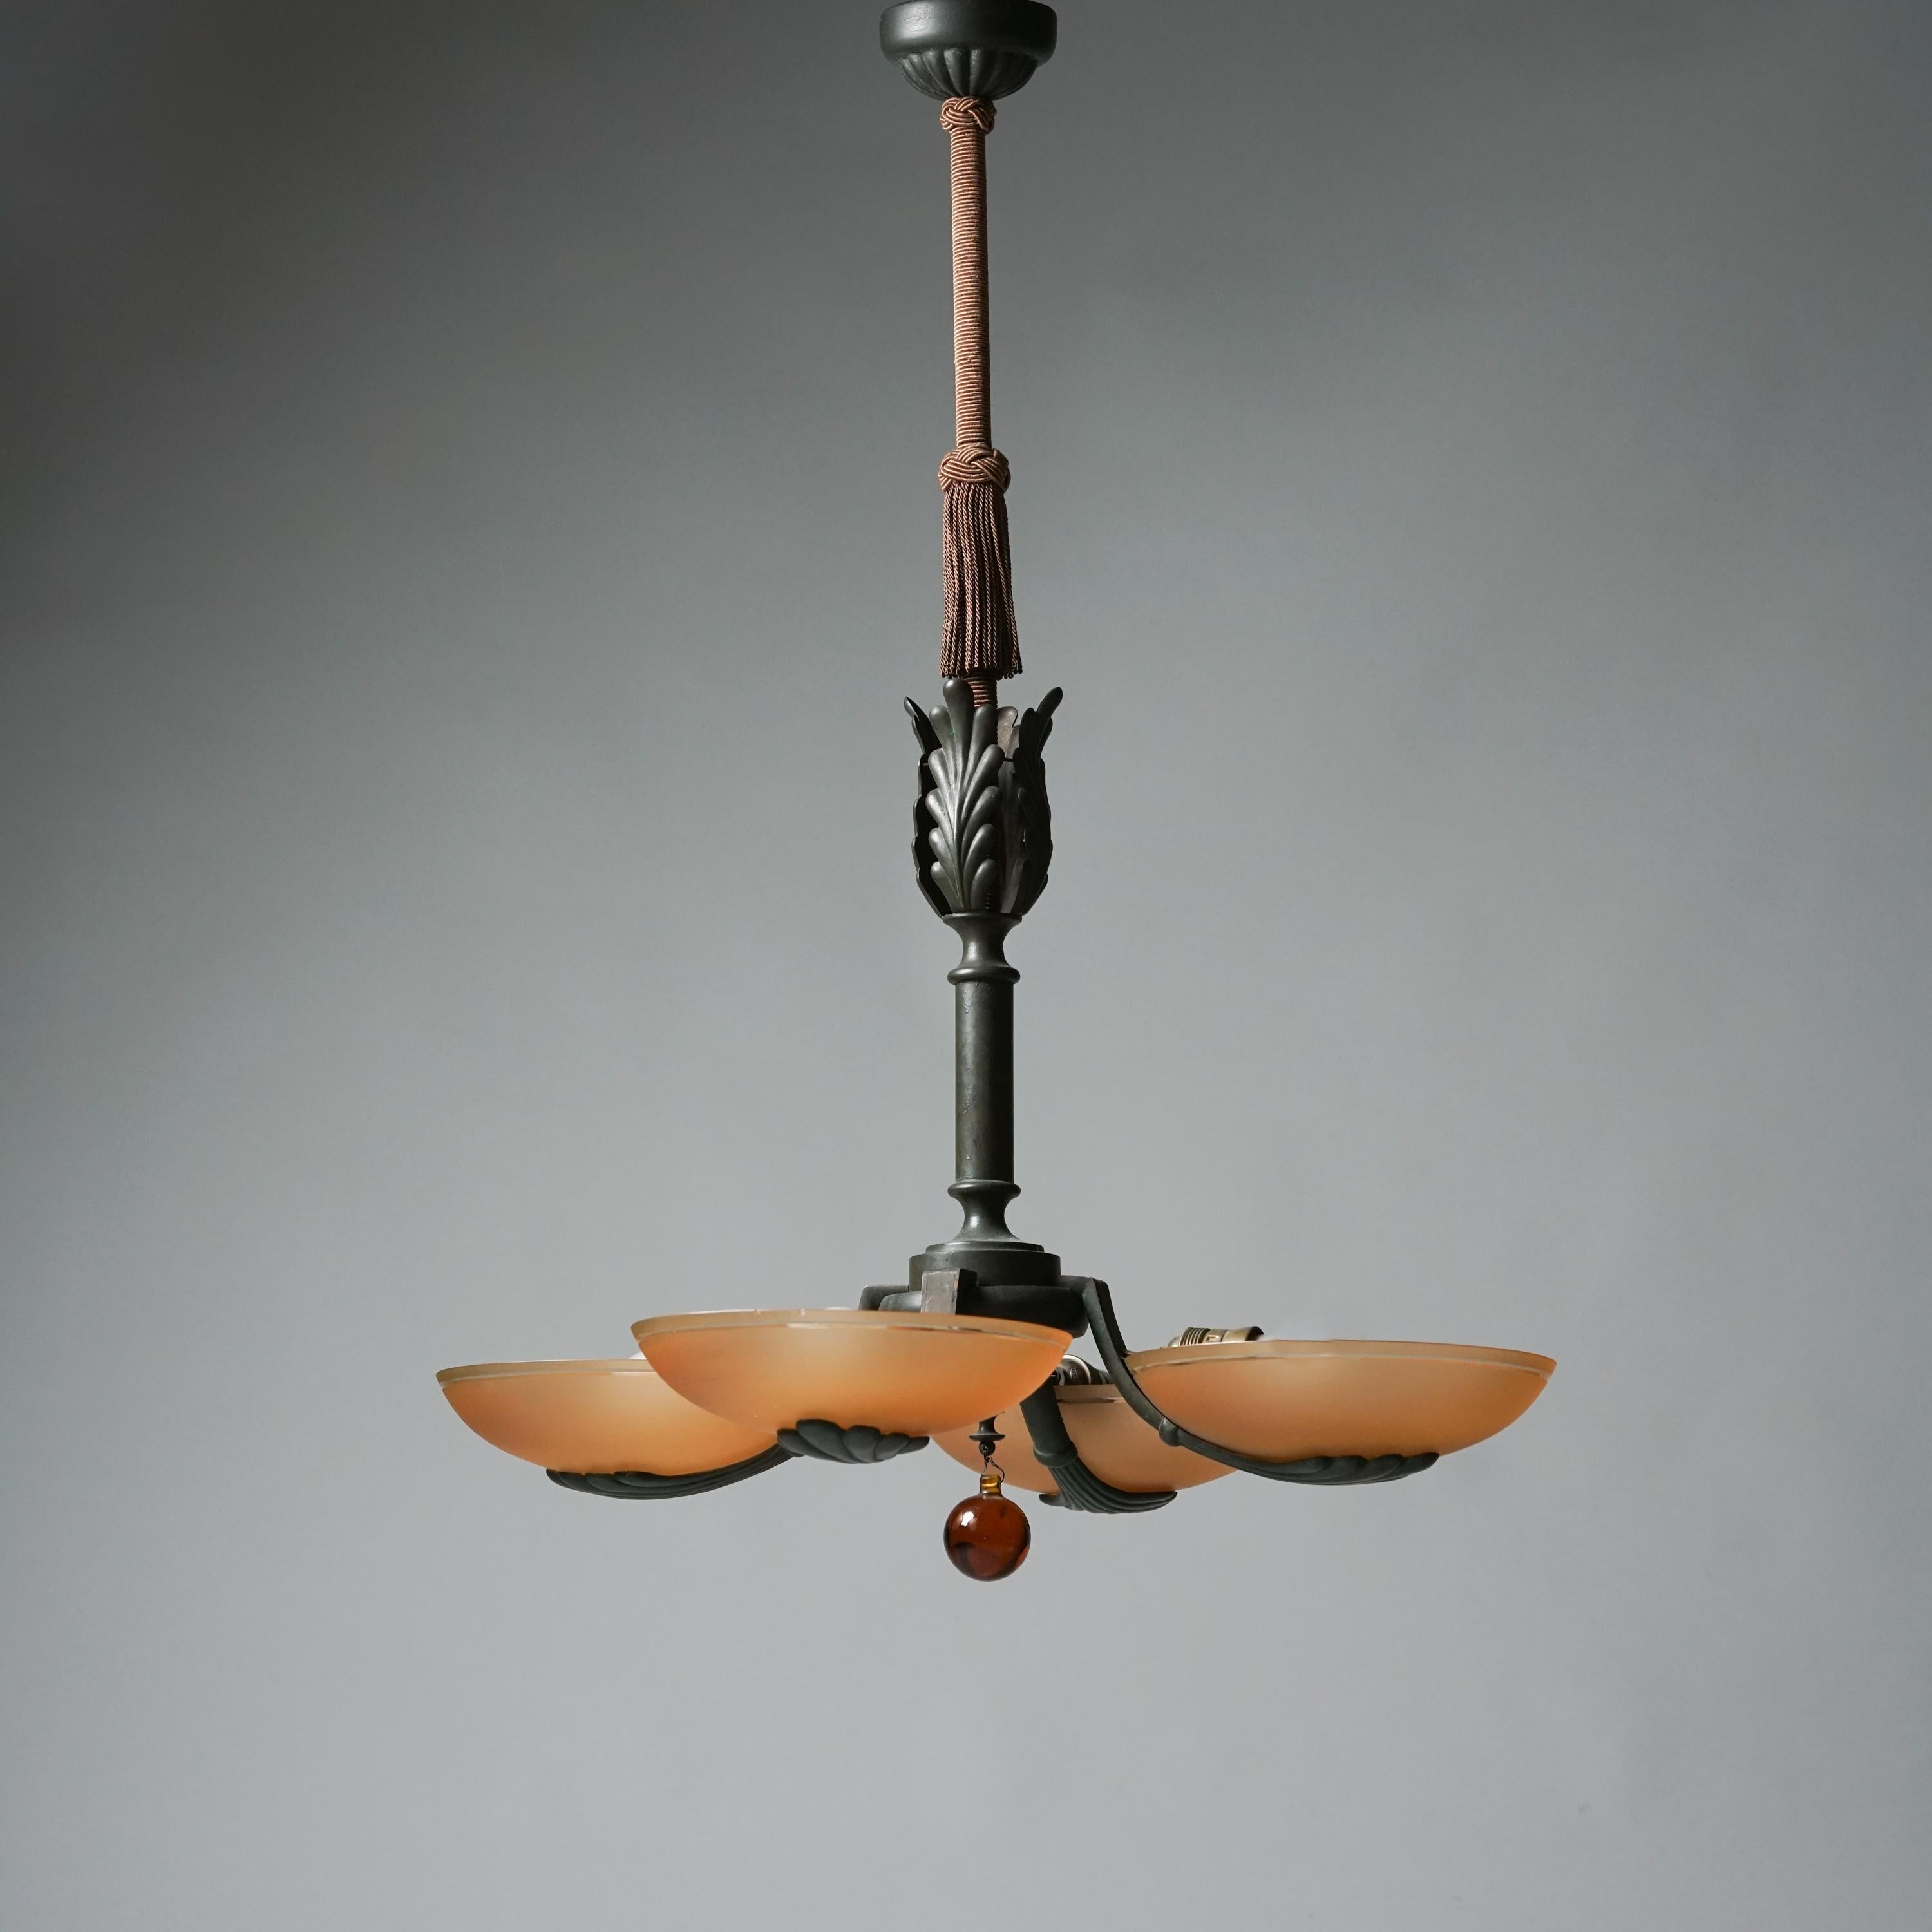 Pendant model 479/4 by Taidetakomo Hakkarainen from the 1930s. Forged iron frame with opaline glass shades, glass detail and braided fabric detail. Good vintage condition, patina and minor wear consistent with age and use. 
This model can be found